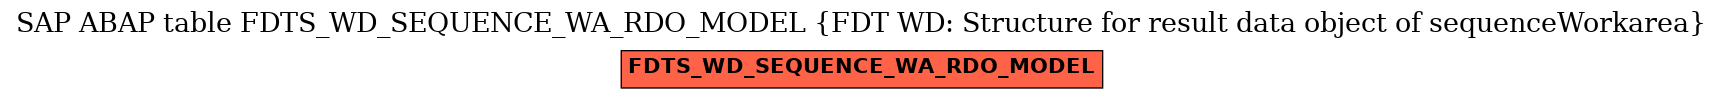 E-R Diagram for table FDTS_WD_SEQUENCE_WA_RDO_MODEL (FDT WD: Structure for result data object of sequenceWorkarea)